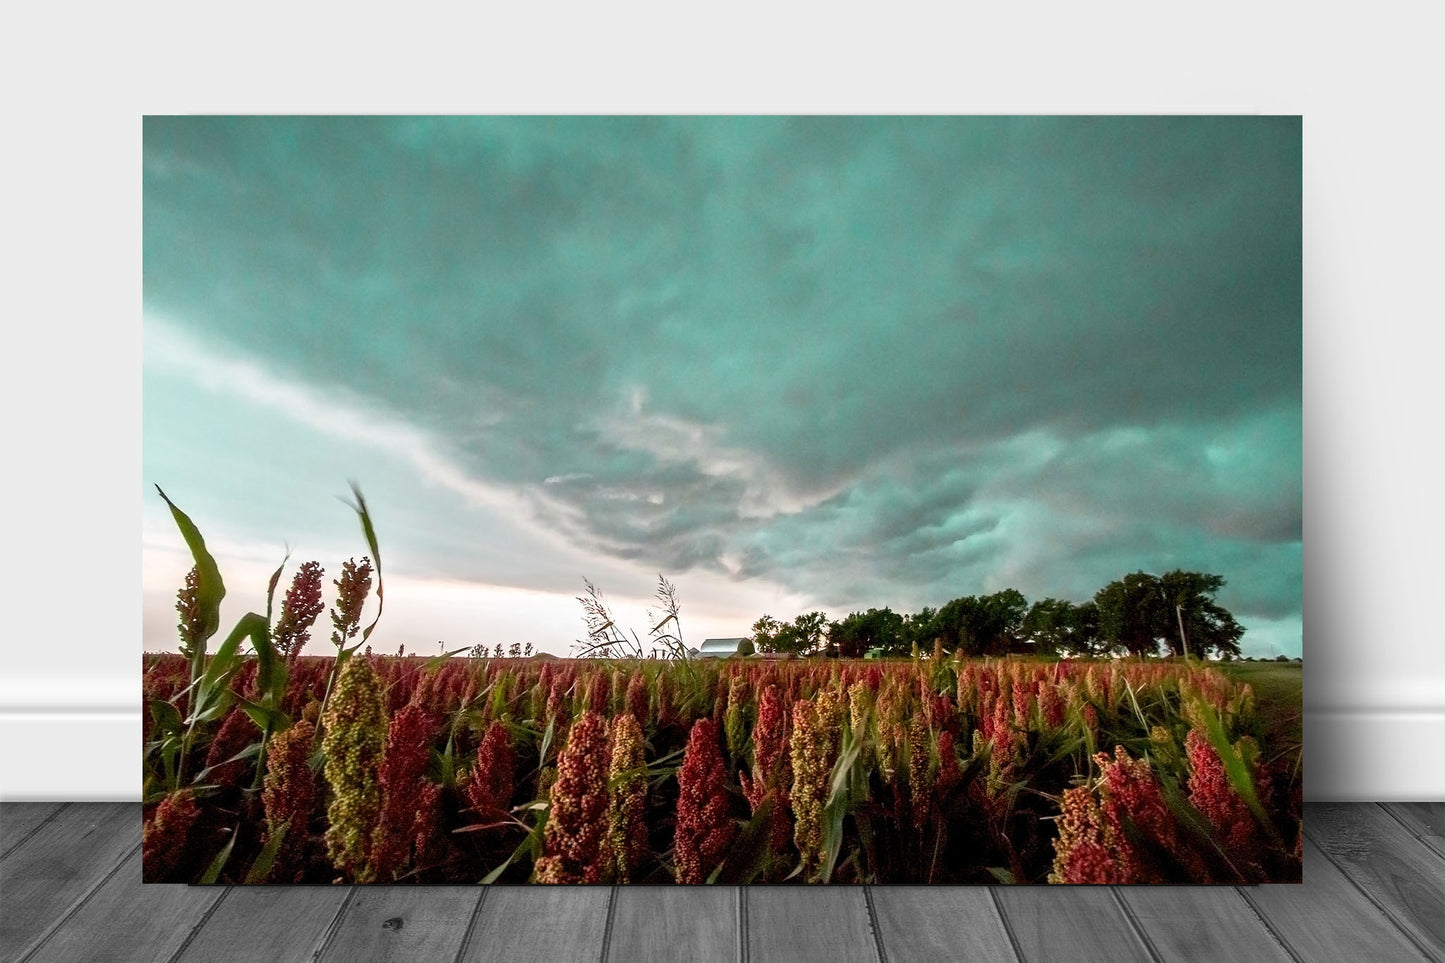 Farm metal print wall art on aluminum of a colorful maize field under an advancing thunderstorm on a stormy summer day in Oklahoma by Sean Ramsey of Southern Plains Photography.